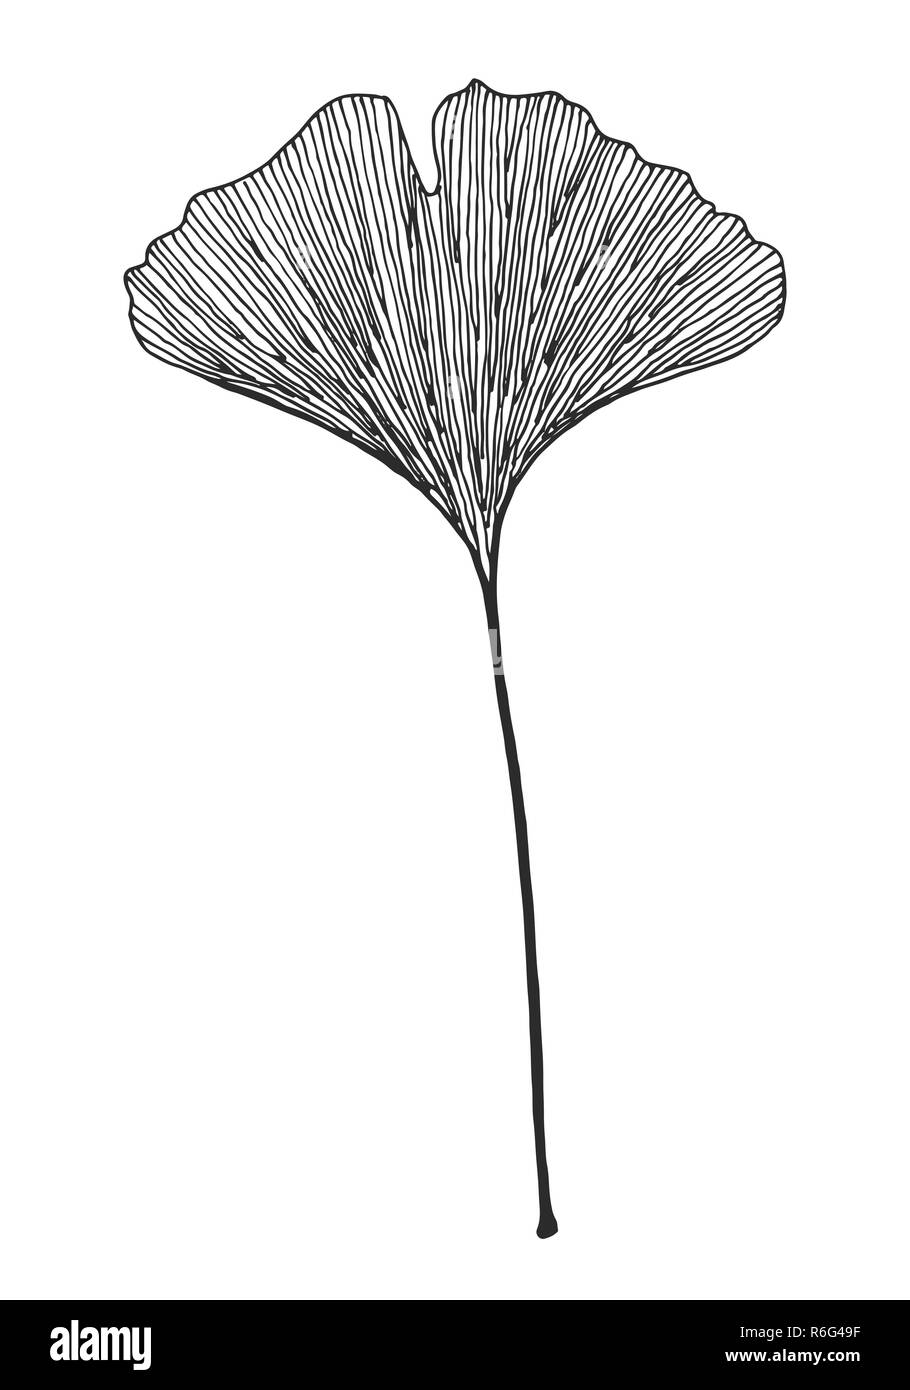 Ginkgo textured leaf vector black on white background Stock Vector